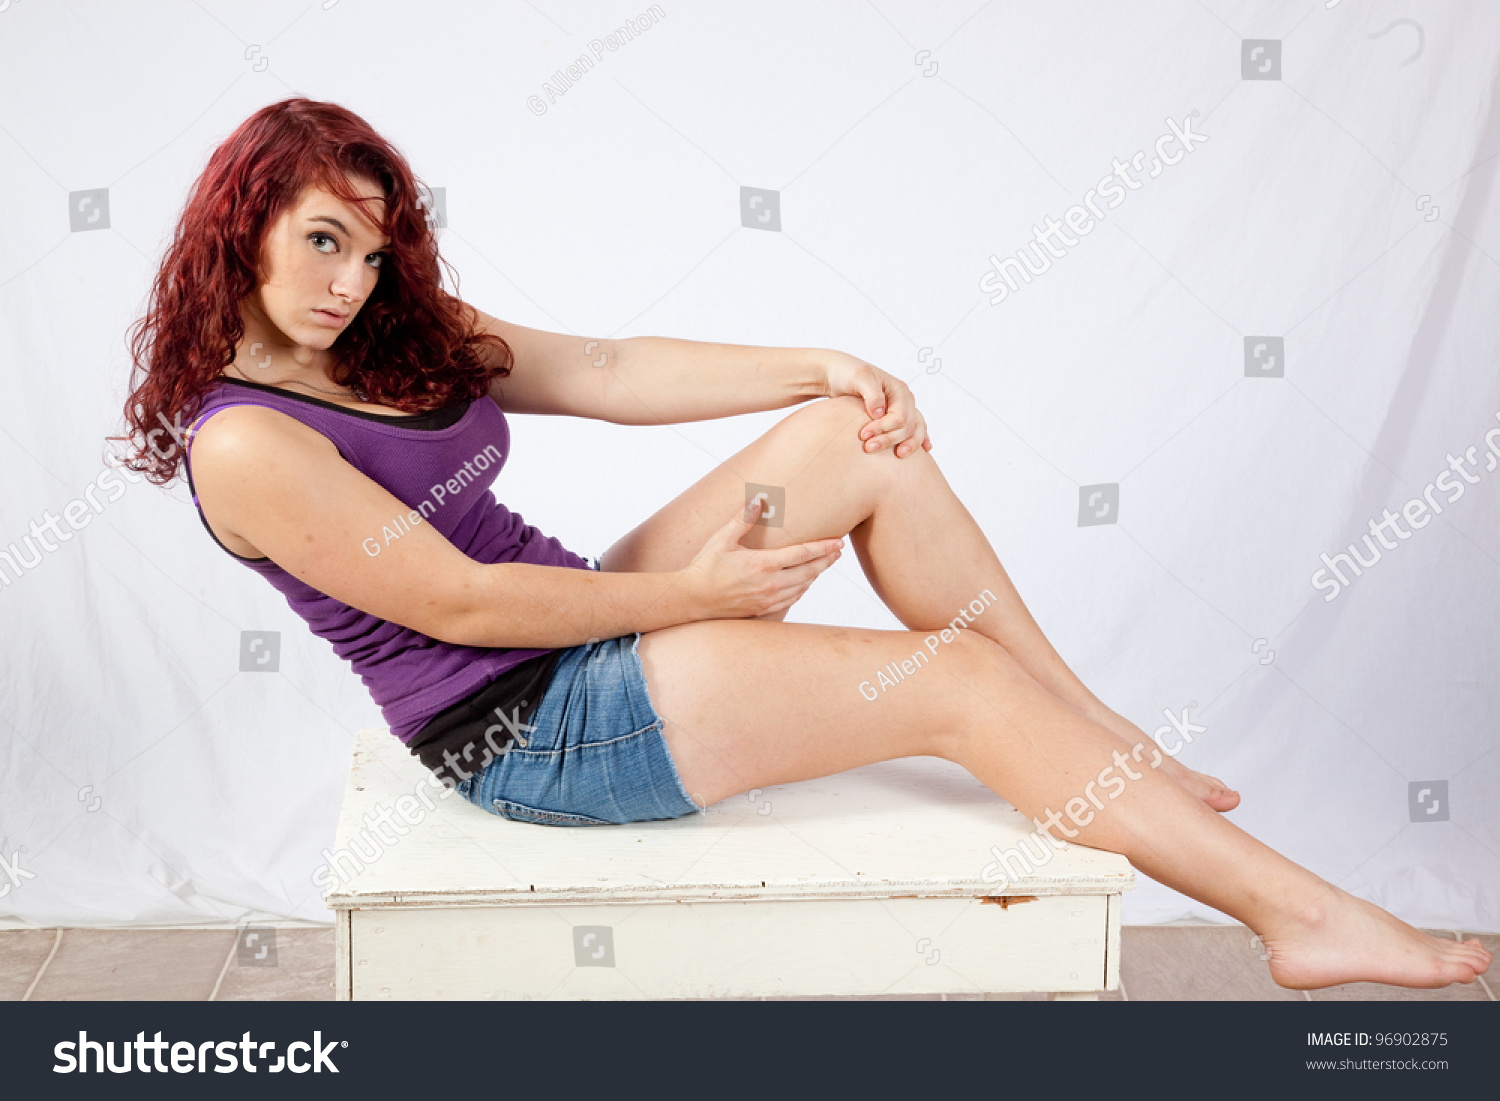 Sit Down Knee Stock Images, Royalty-Free Images & Vectors 